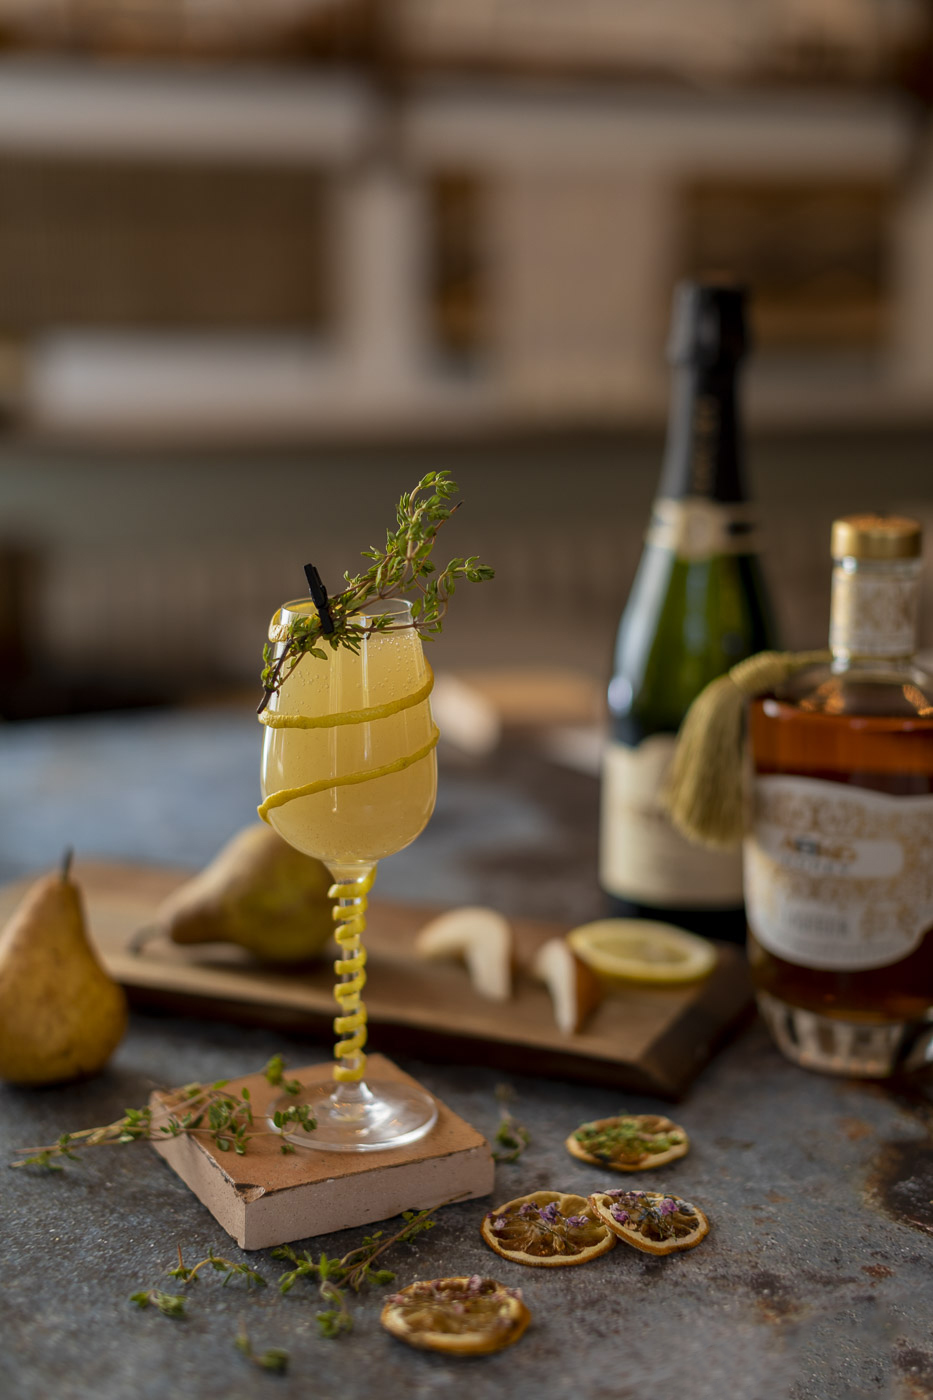 Rainy Day Bubbles cocktail with lemon twist and thyme bundle garnish